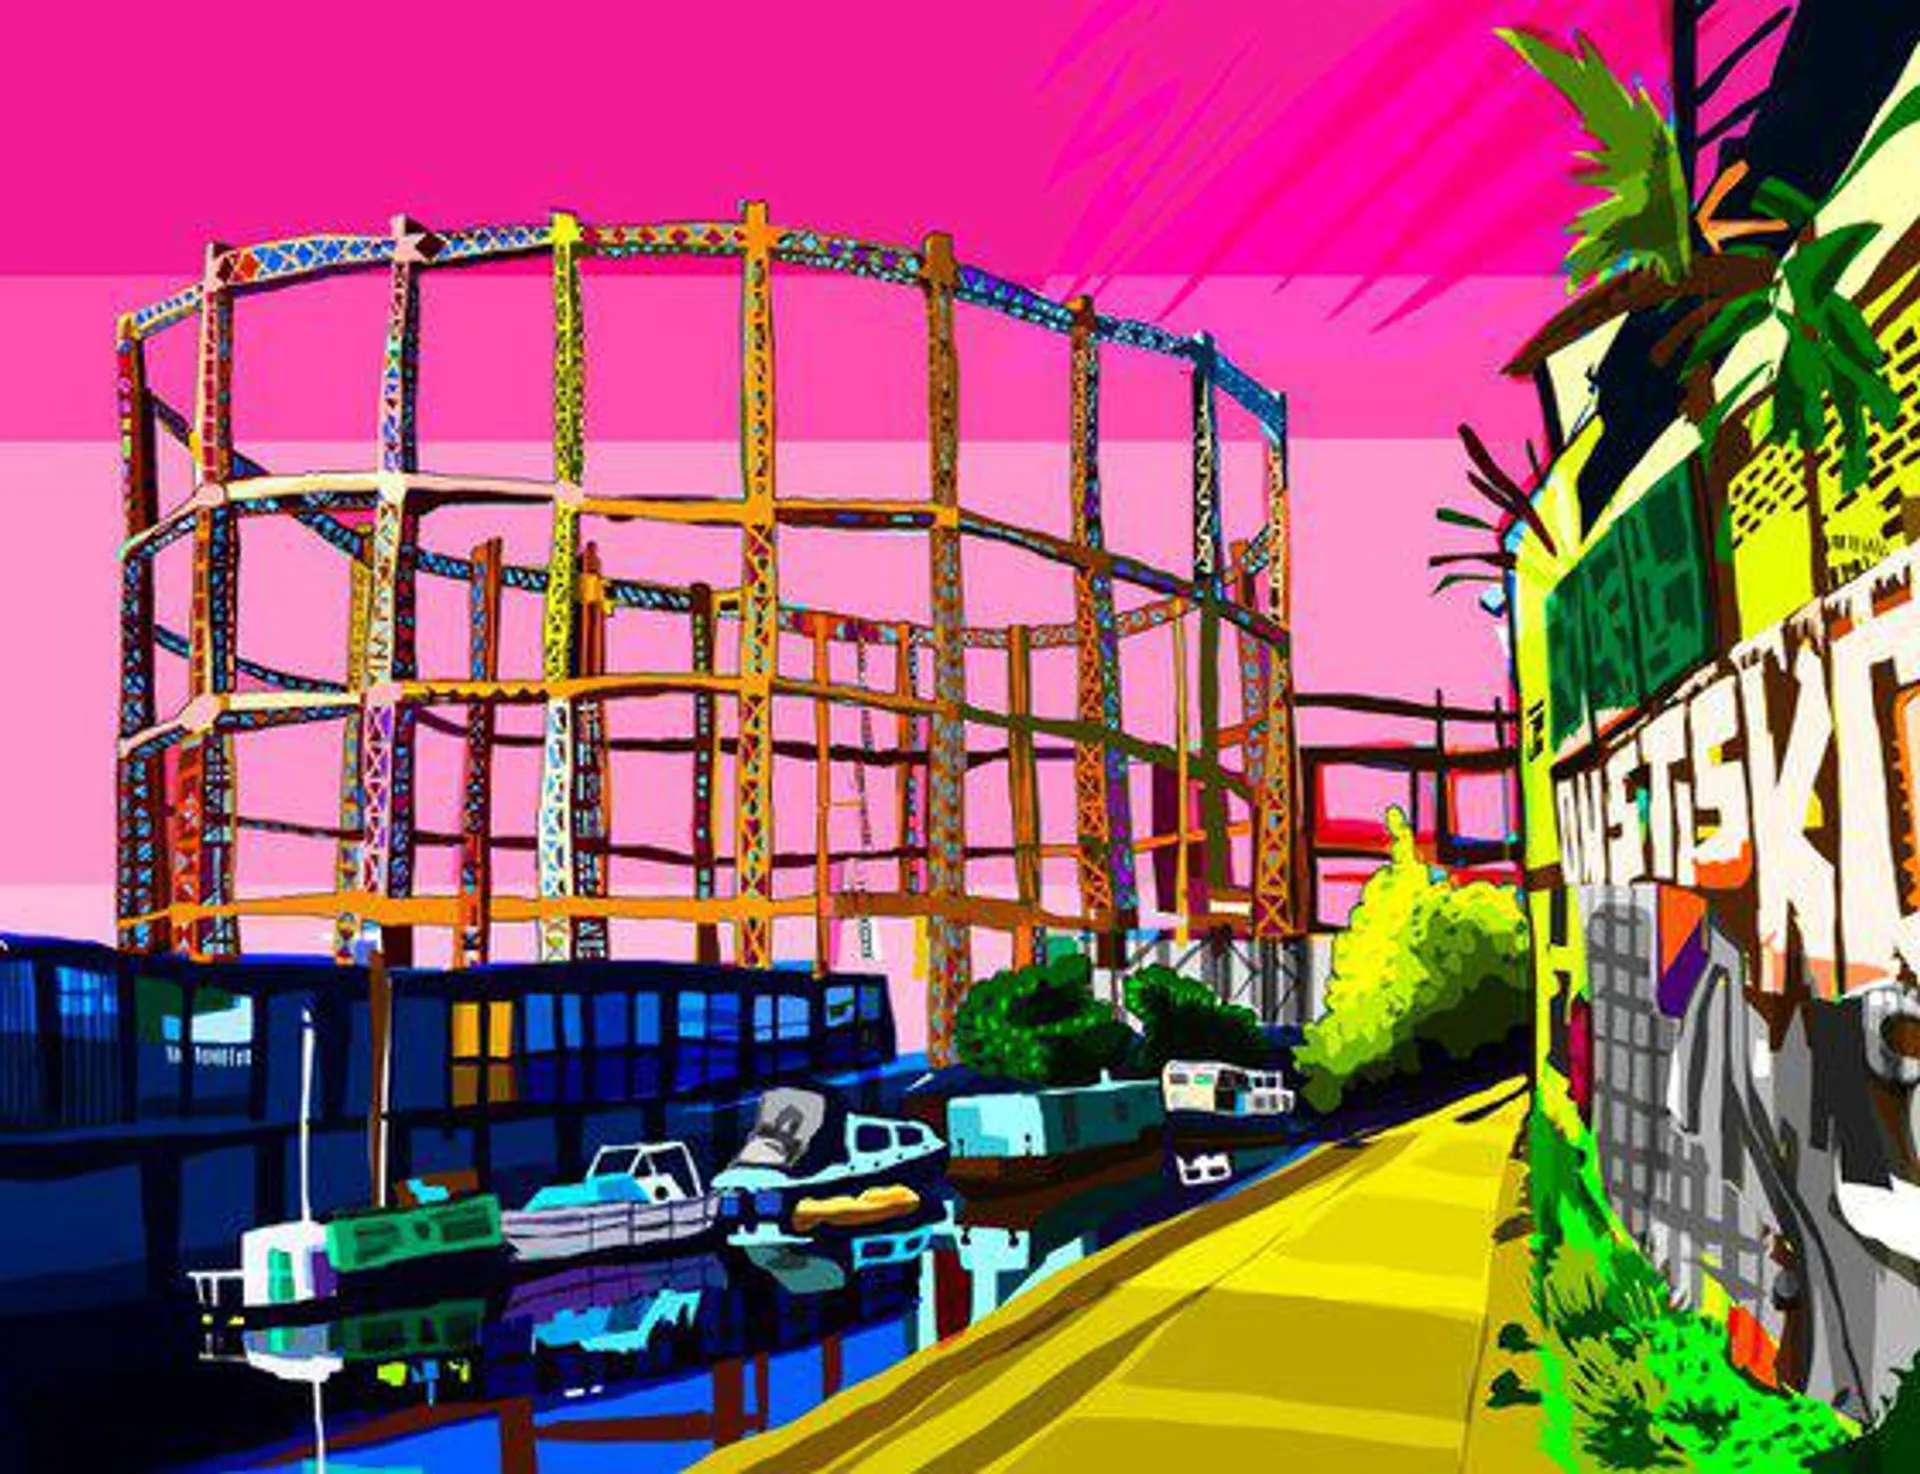 A3 Bethnal Green Gas Holders (Pink), East London Illustration Print (2017)